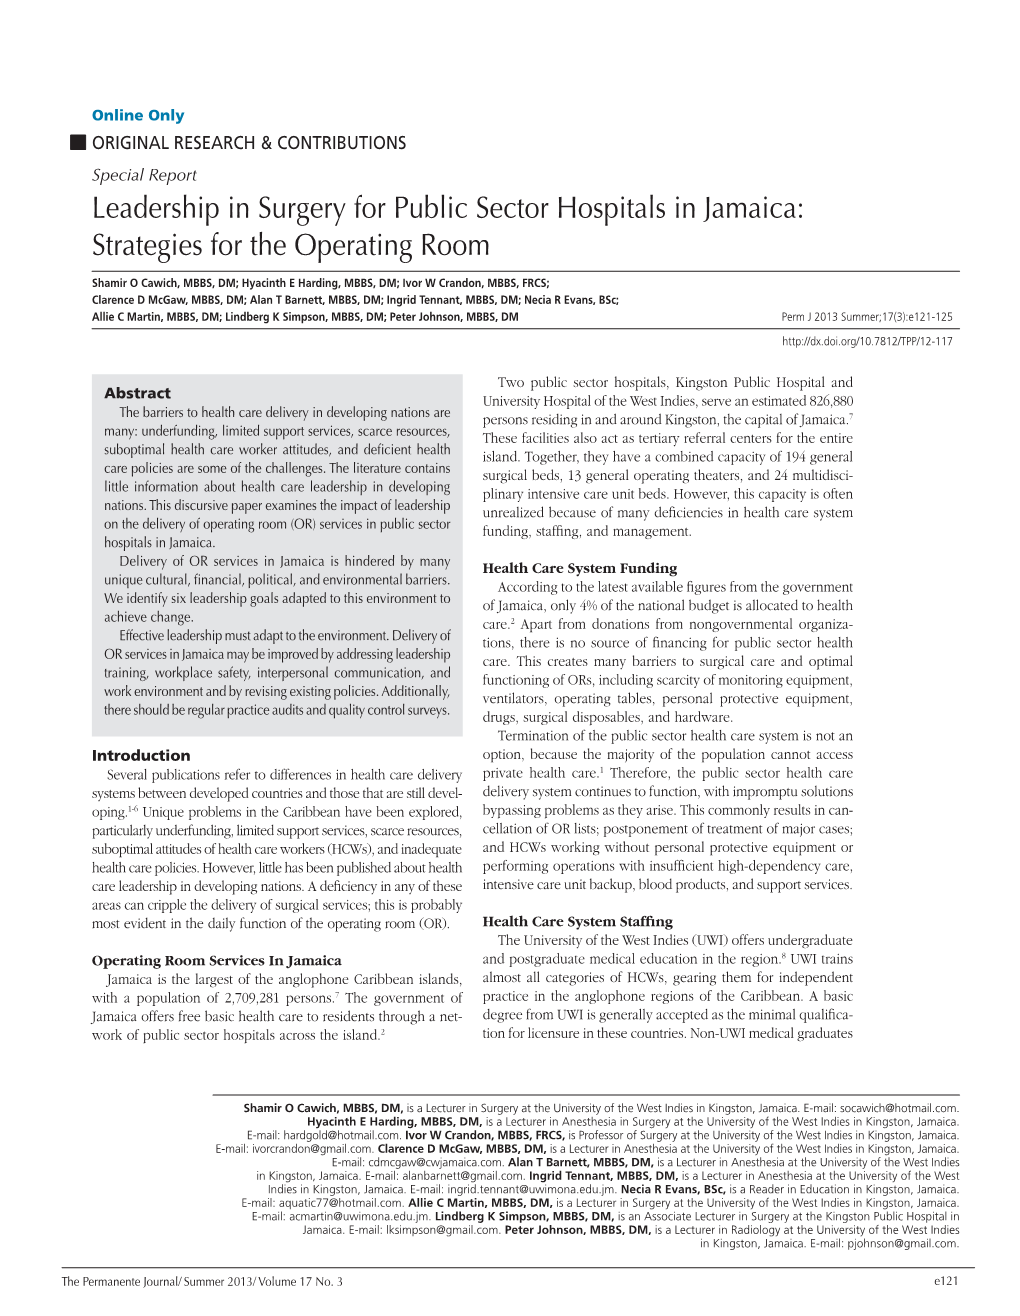 Leadership in Surgery for Public Sector Hospitals in Jamaica: Strategies for the Operating Room